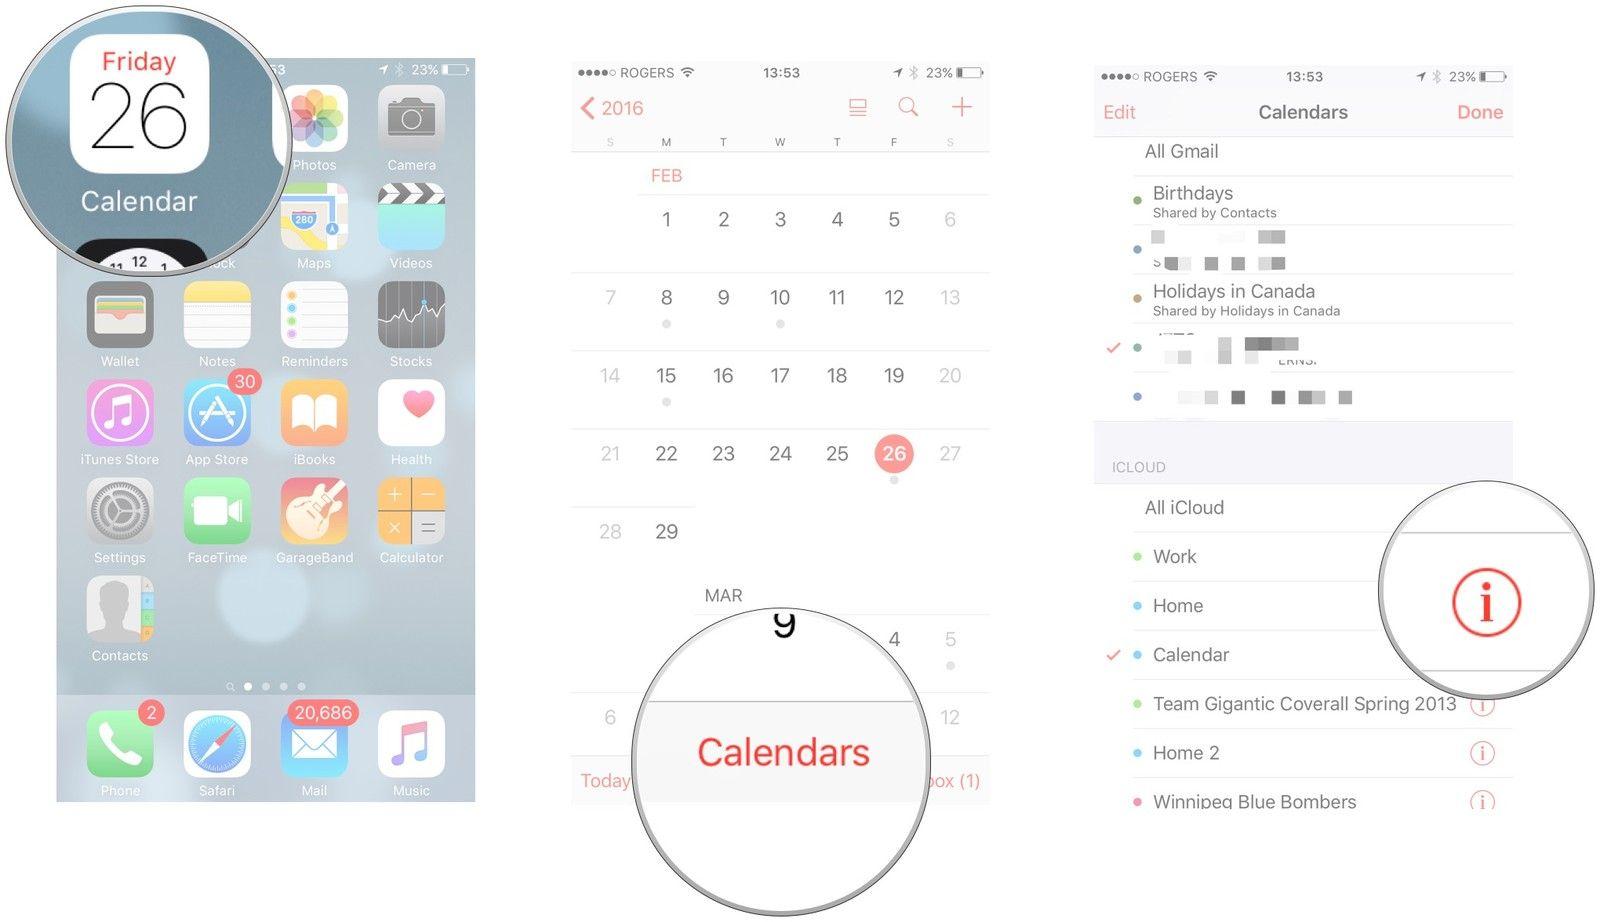 iPad Calendar App Logo - How to share events with Calendar for iPhone and iPad